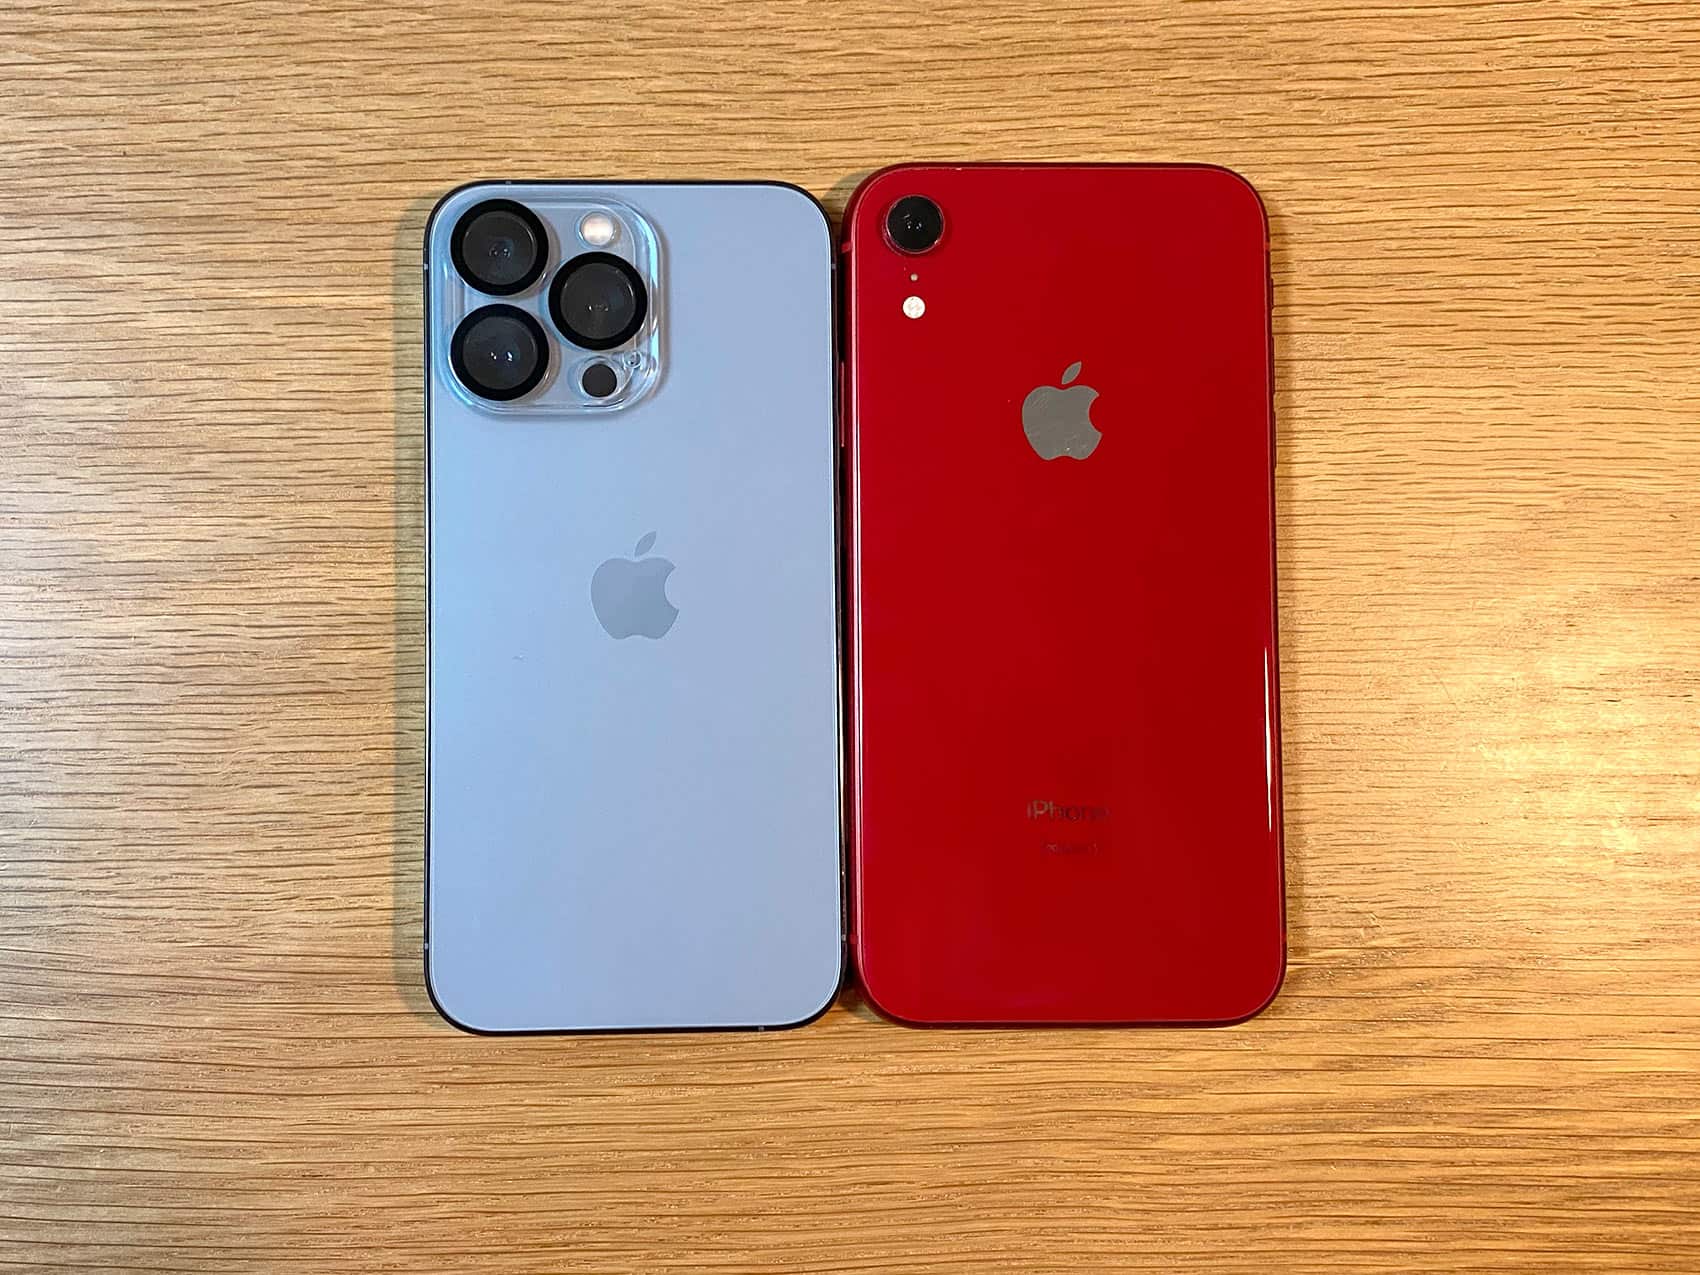 iPhone 13 Pro 256GB シエラブルーとiPhone XR (PRODUCT)RED